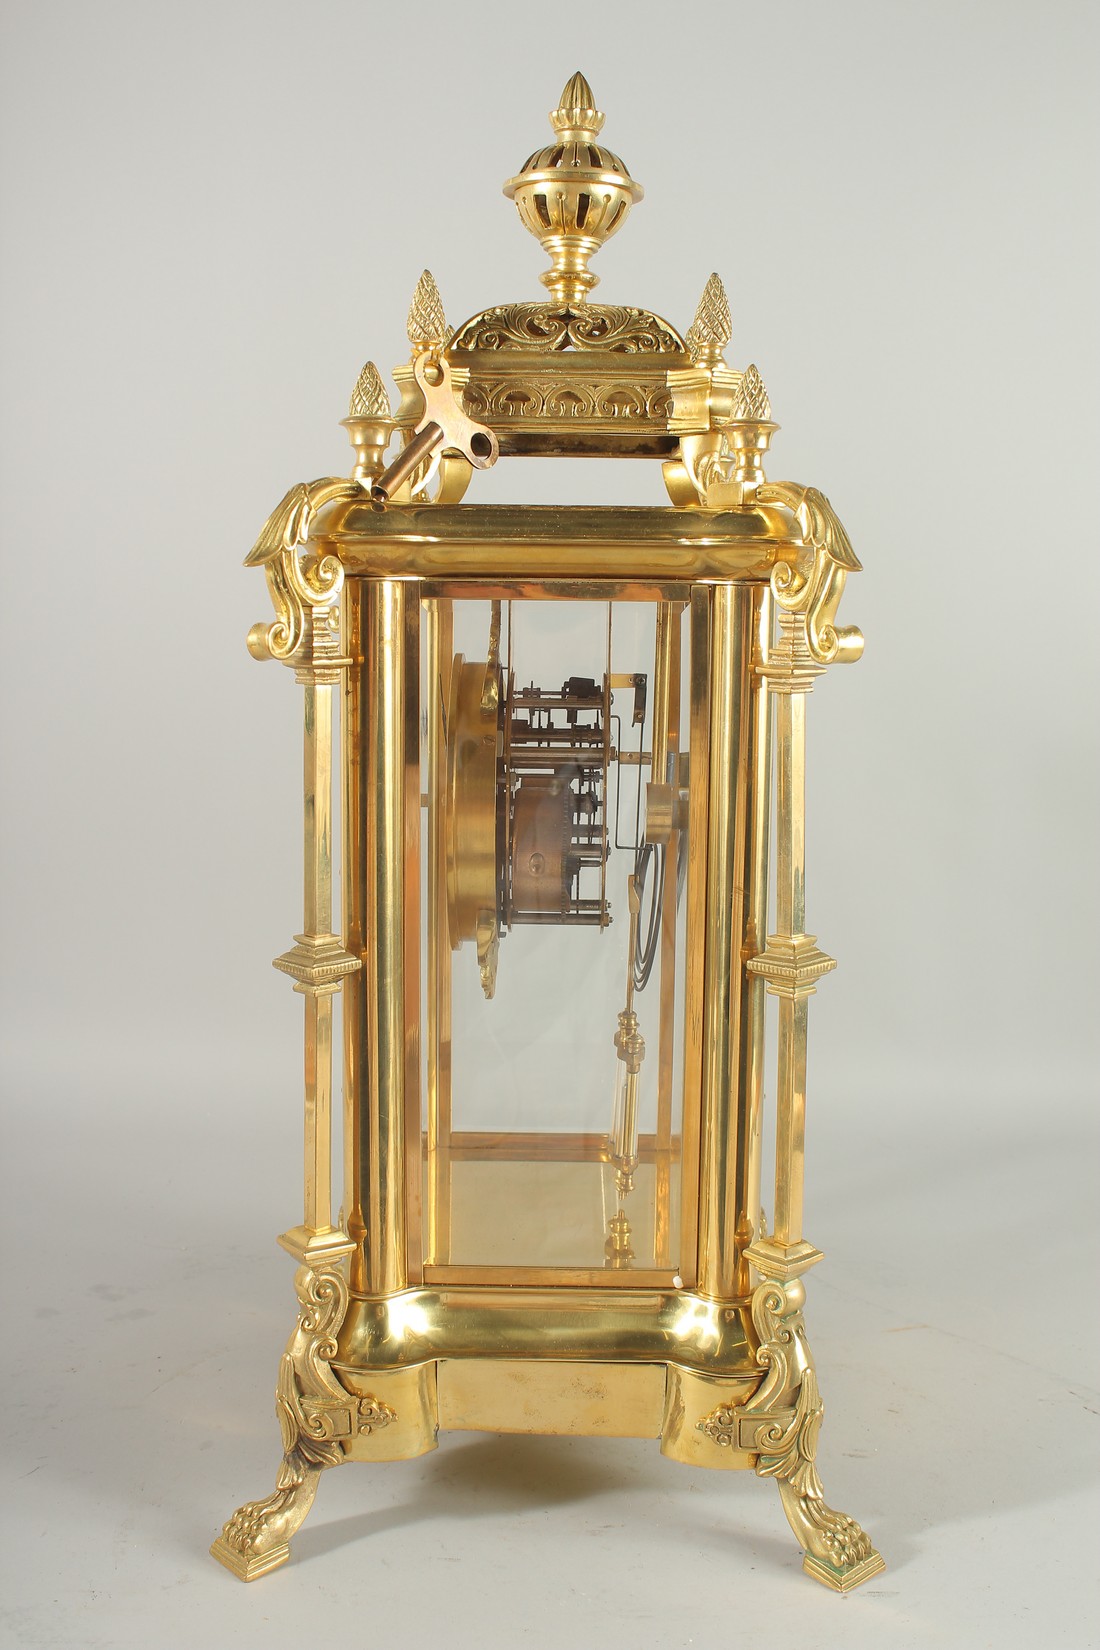 A GOOD GILT BRONZE FOUR GLASS CLOCK with pineapple finials on claw feet. 24ins high. - Image 3 of 5